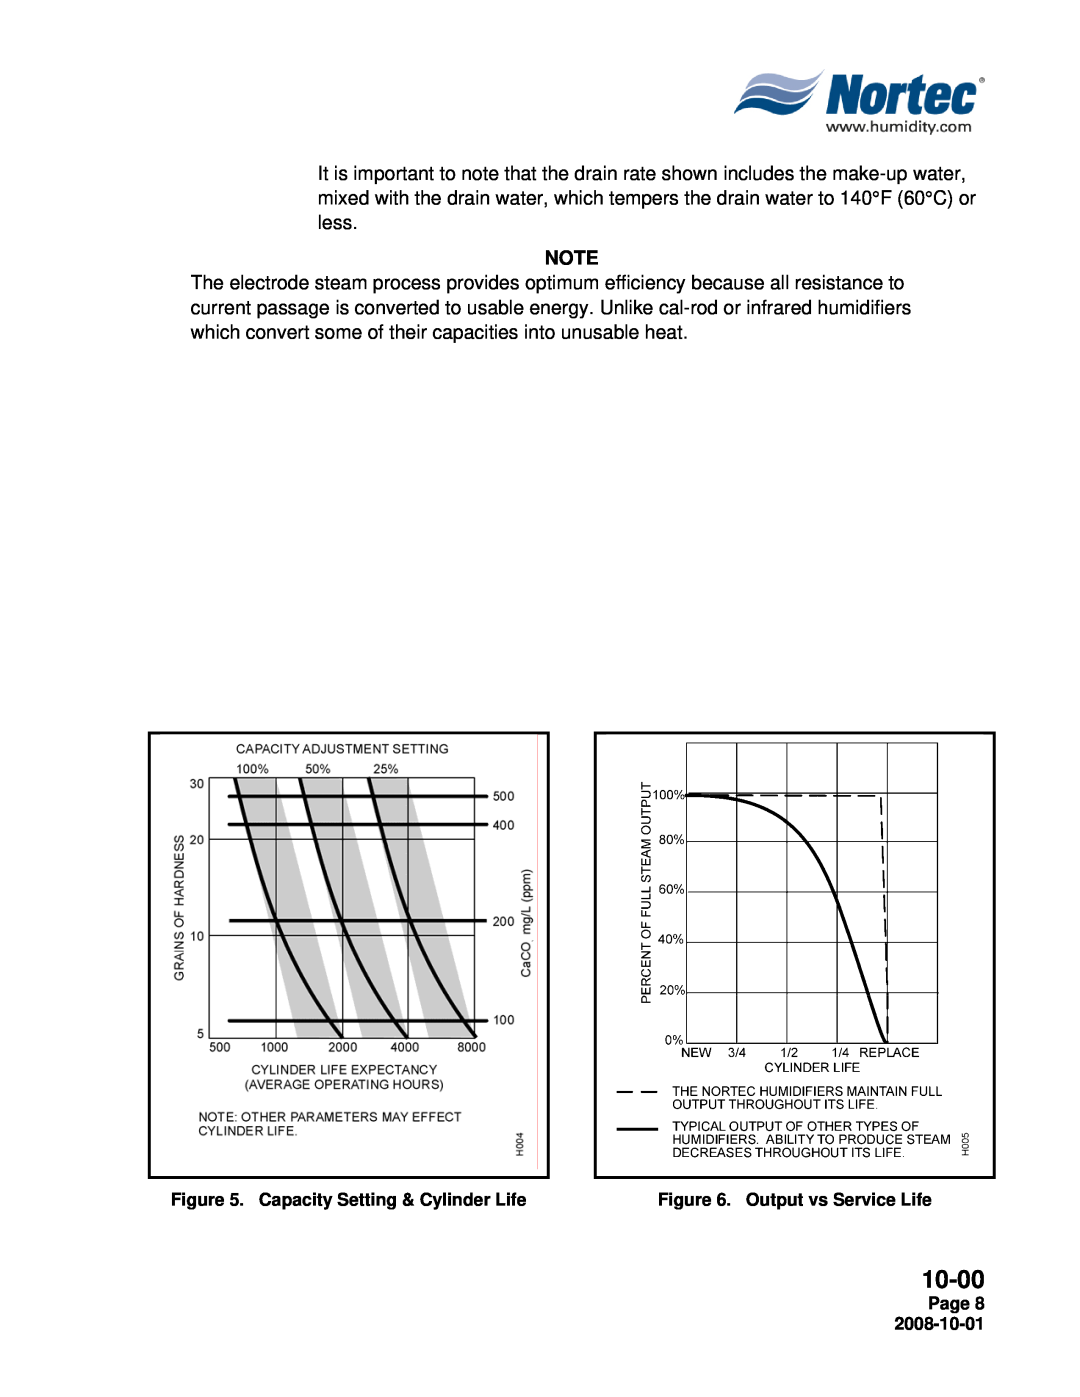 Nortec NHPC, NHTC manual 10-00, Capacity Setting & Cylinder Life, Output vs Service Life, Page 8 